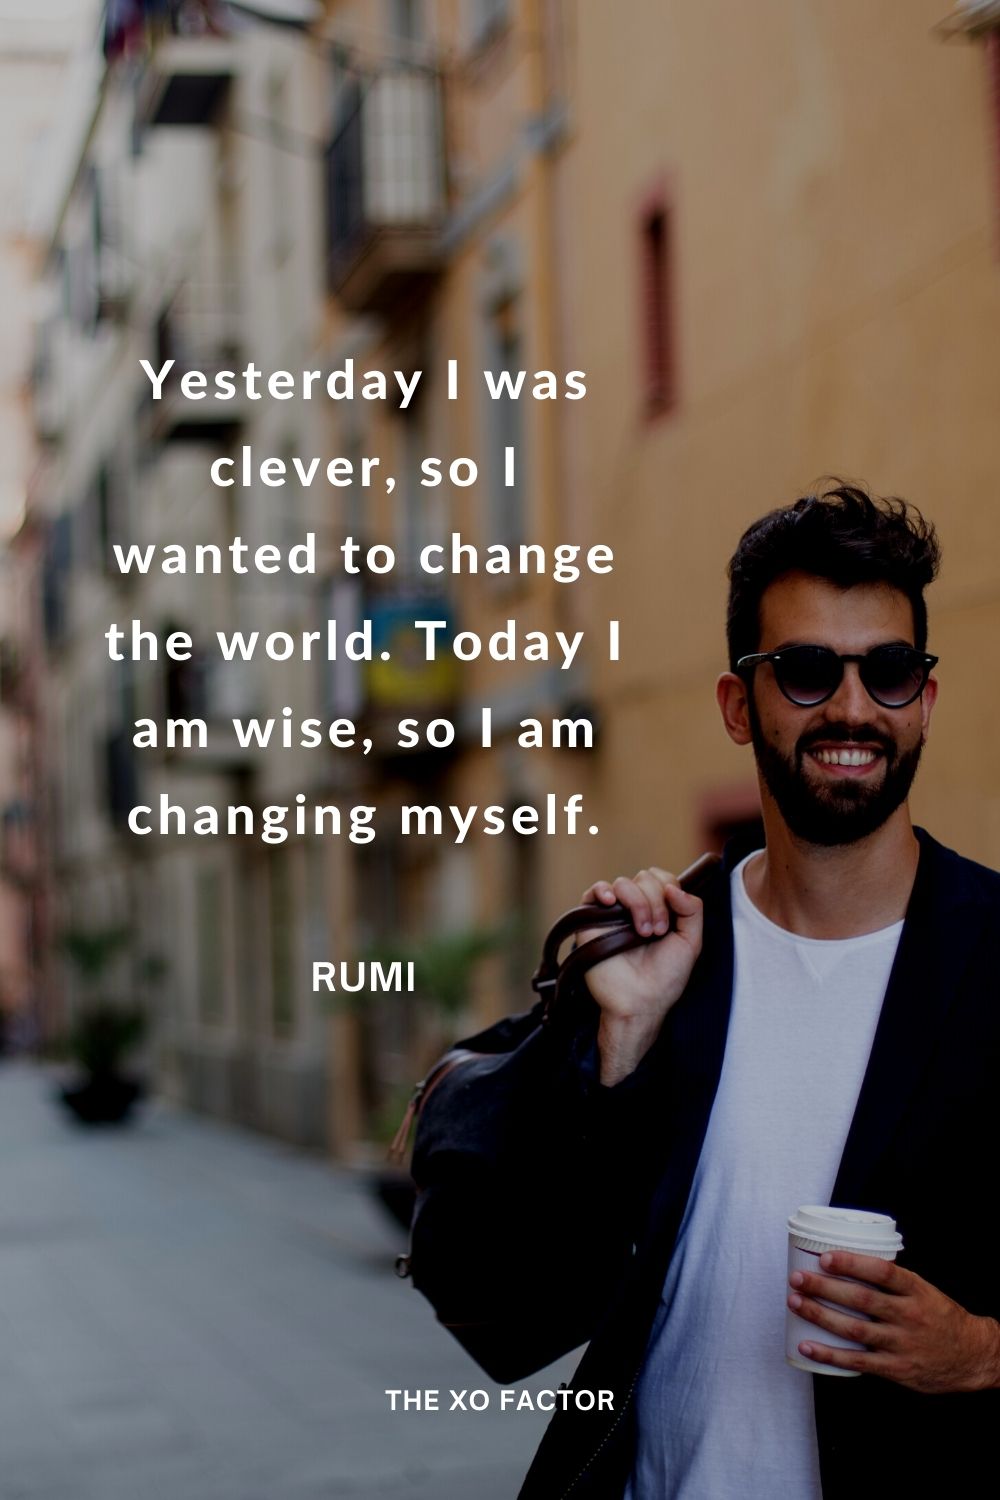 Yesterday I was clever, so I wanted to change the world. Today I am wise, so I am changing myself. Rumi